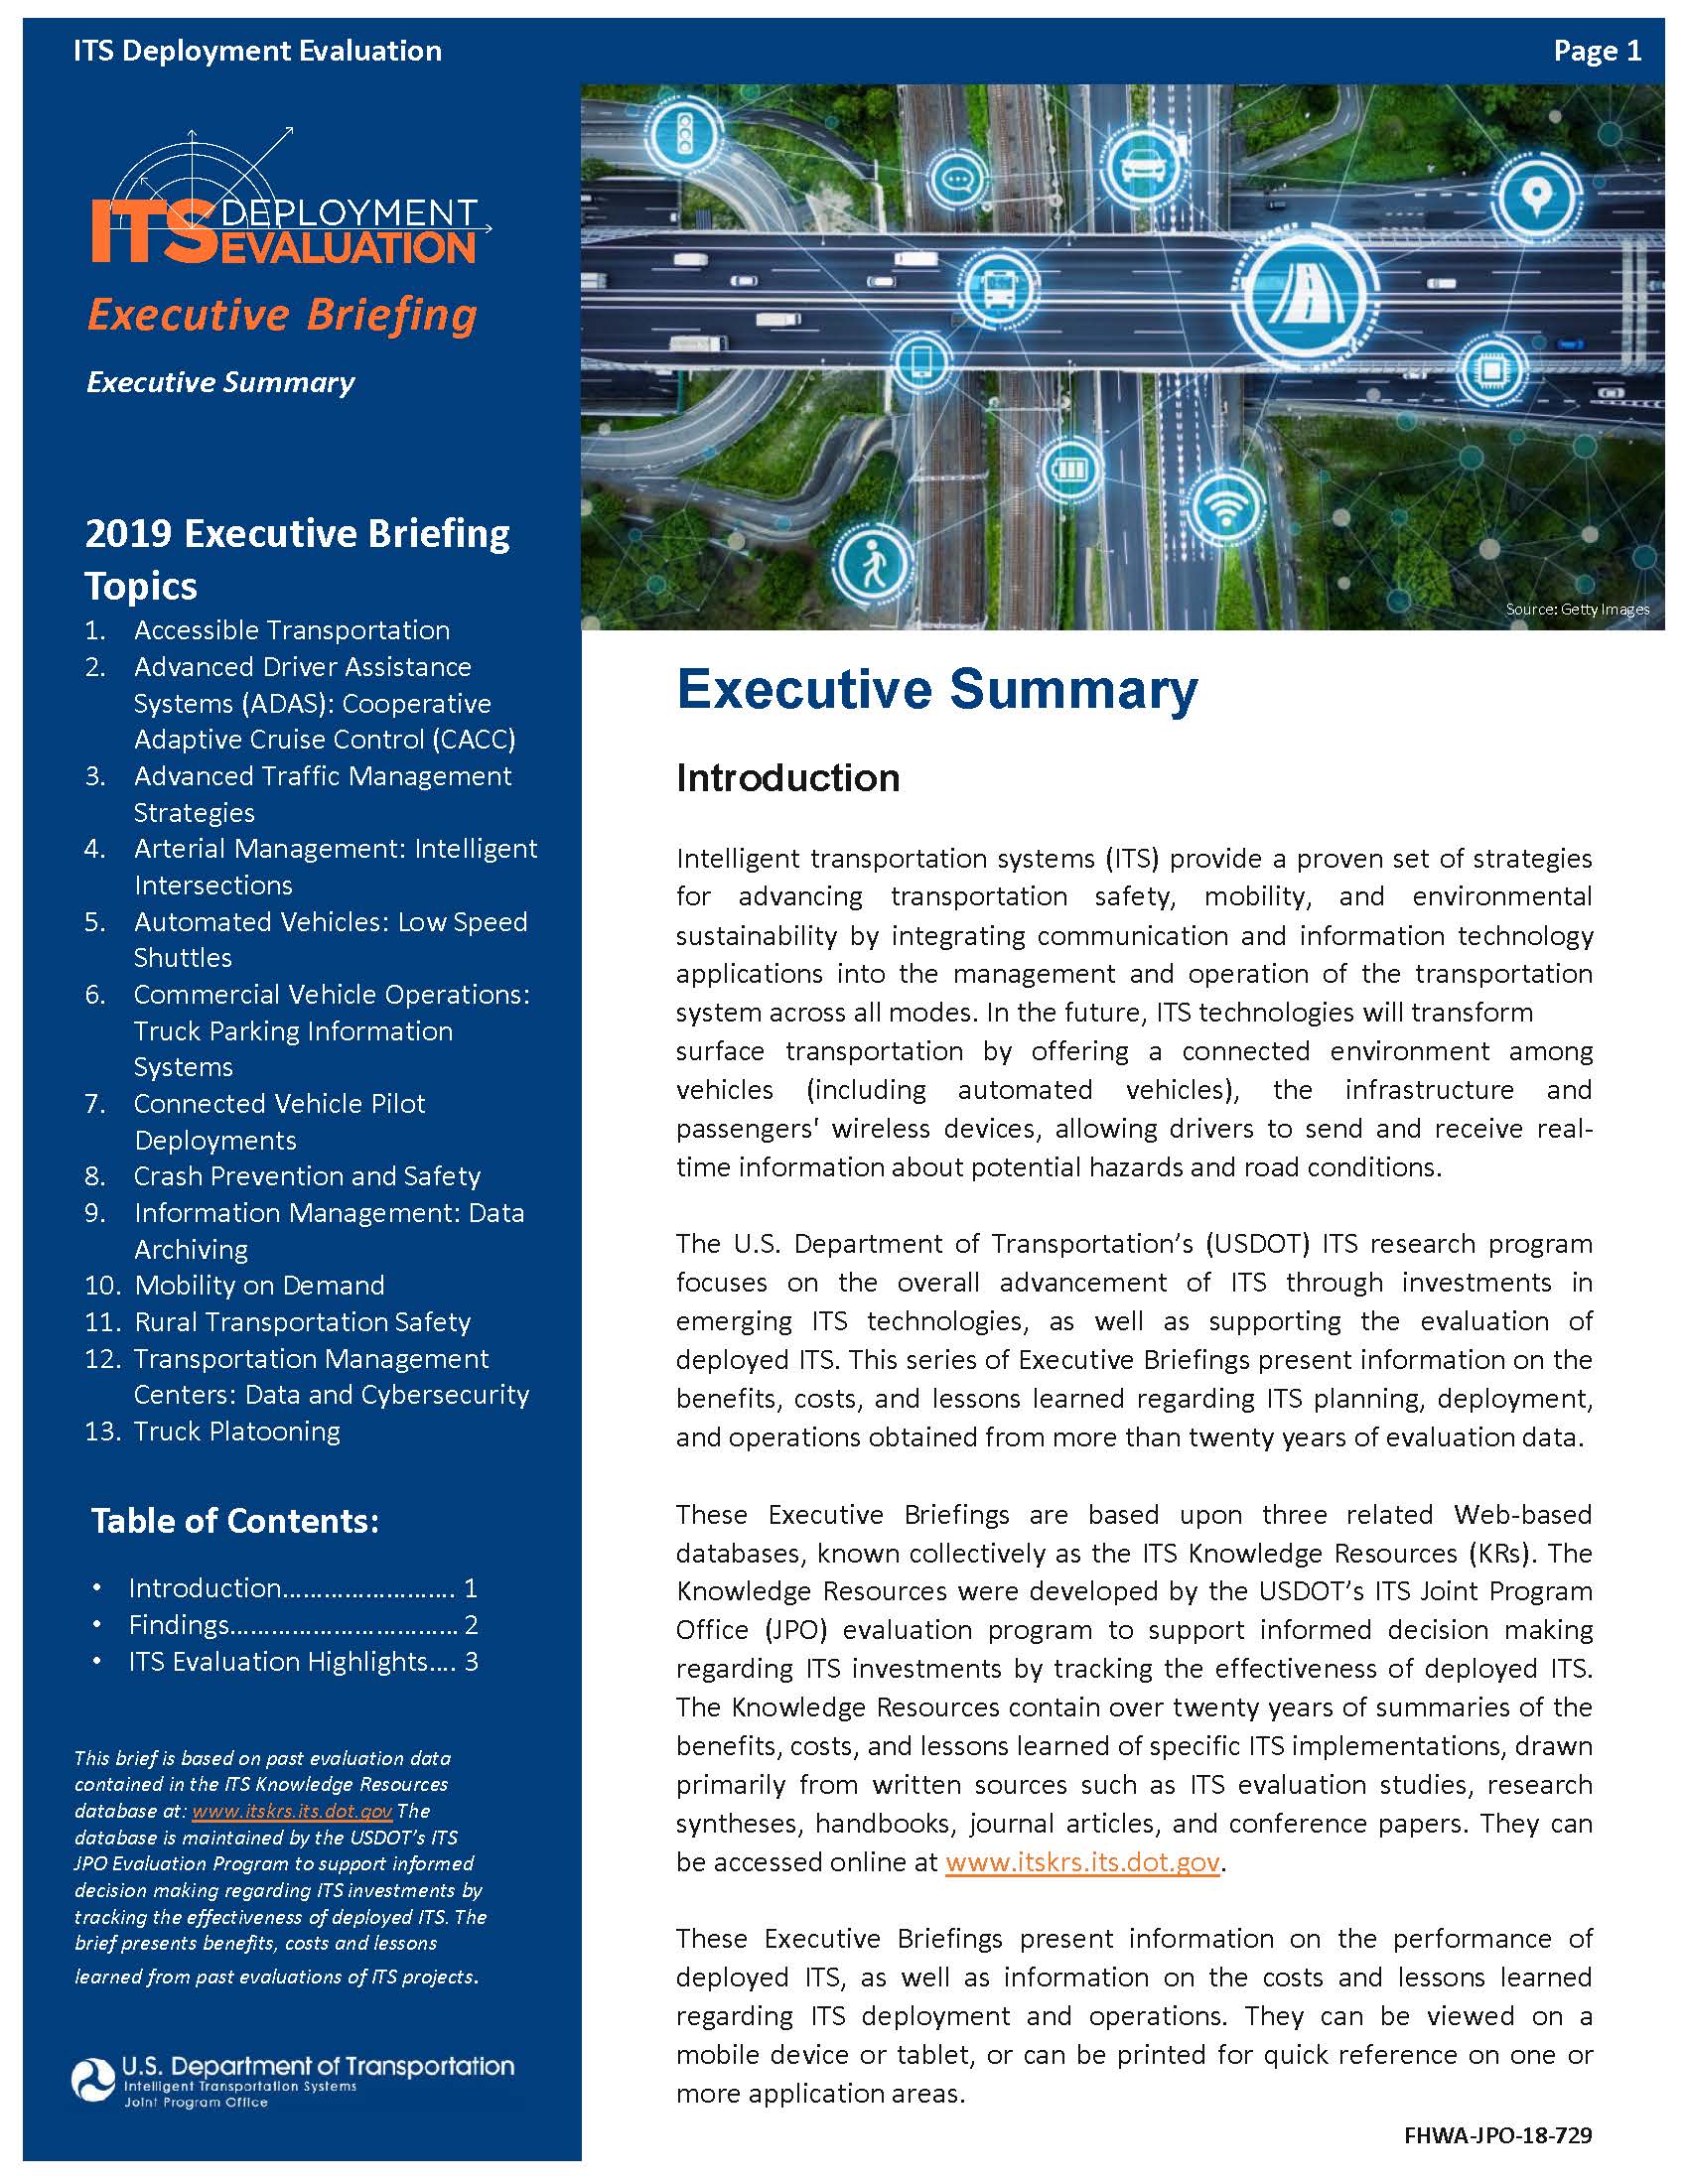 Cover Page of the 2019 Executive Briefings Executive Summary